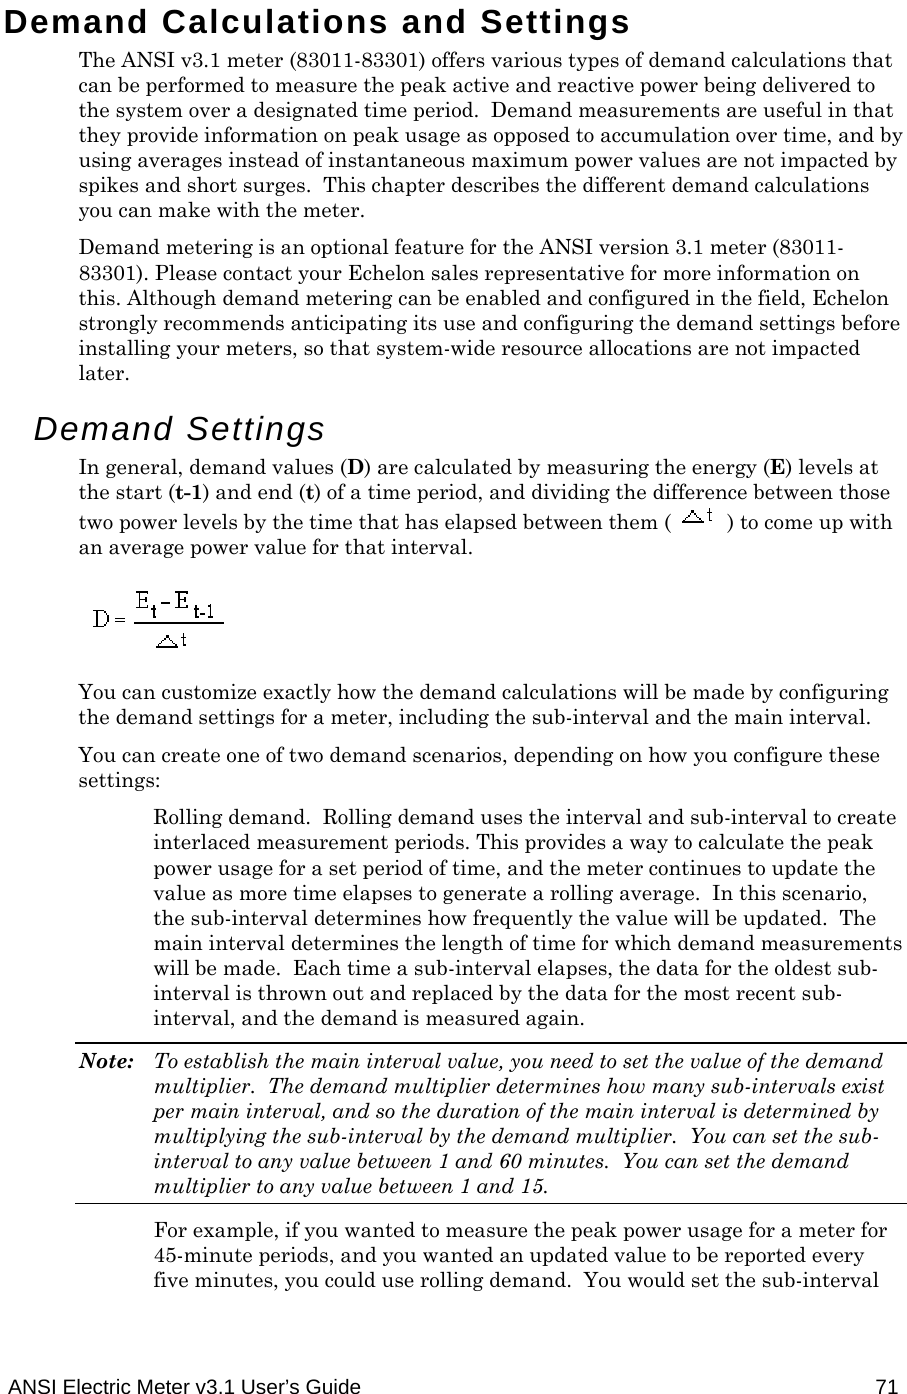  ANSI Electric Meter v3.1 User’s Guide  71 Demand Calculations and Settings The ANSI v3.1 meter (83011-83301) offers various types of demand calculations that can be performed to measure the peak active and reactive power being delivered to the system over a designated time period.  Demand measurements are useful in that they provide information on peak usage as opposed to accumulation over time, and by using averages instead of instantaneous maximum power values are not impacted by spikes and short surges.  This chapter describes the different demand calculations you can make with the meter. Demand metering is an optional feature for the ANSI version 3.1 meter (83011-83301). Please contact your Echelon sales representative for more information on this. Although demand metering can be enabled and configured in the field, Echelon strongly recommends anticipating its use and configuring the demand settings before installing your meters, so that system-wide resource allocations are not impacted later. Demand Settings In general, demand values (D) are calculated by measuring the energy (E) levels at the start (t-1) and end (t) of a time period, and dividing the difference between those two power levels by the time that has elapsed between them ( ) to come up with an average power value for that interval.  You can customize exactly how the demand calculations will be made by configuring the demand settings for a meter, including the sub-interval and the main interval. You can create one of two demand scenarios, depending on how you configure these settings: Rolling demand.  Rolling demand uses the interval and sub-interval to create interlaced measurement periods. This provides a way to calculate the peak power usage for a set period of time, and the meter continues to update the value as more time elapses to generate a rolling average.  In this scenario, the sub-interval determines how frequently the value will be updated.  The main interval determines the length of time for which demand measurements will be made.  Each time a sub-interval elapses, the data for the oldest sub-interval is thrown out and replaced by the data for the most recent sub-interval, and the demand is measured again. Note:  To establish the main interval value, you need to set the value of the demand multiplier.  The demand multiplier determines how many sub-intervals exist per main interval, and so the duration of the main interval is determined by multiplying the sub-interval by the demand multiplier.  You can set the sub-interval to any value between 1 and 60 minutes.  You can set the demand multiplier to any value between 1 and 15. For example, if you wanted to measure the peak power usage for a meter for 45-minute periods, and you wanted an updated value to be reported every five minutes, you could use rolling demand.  You would set the sub-interval 